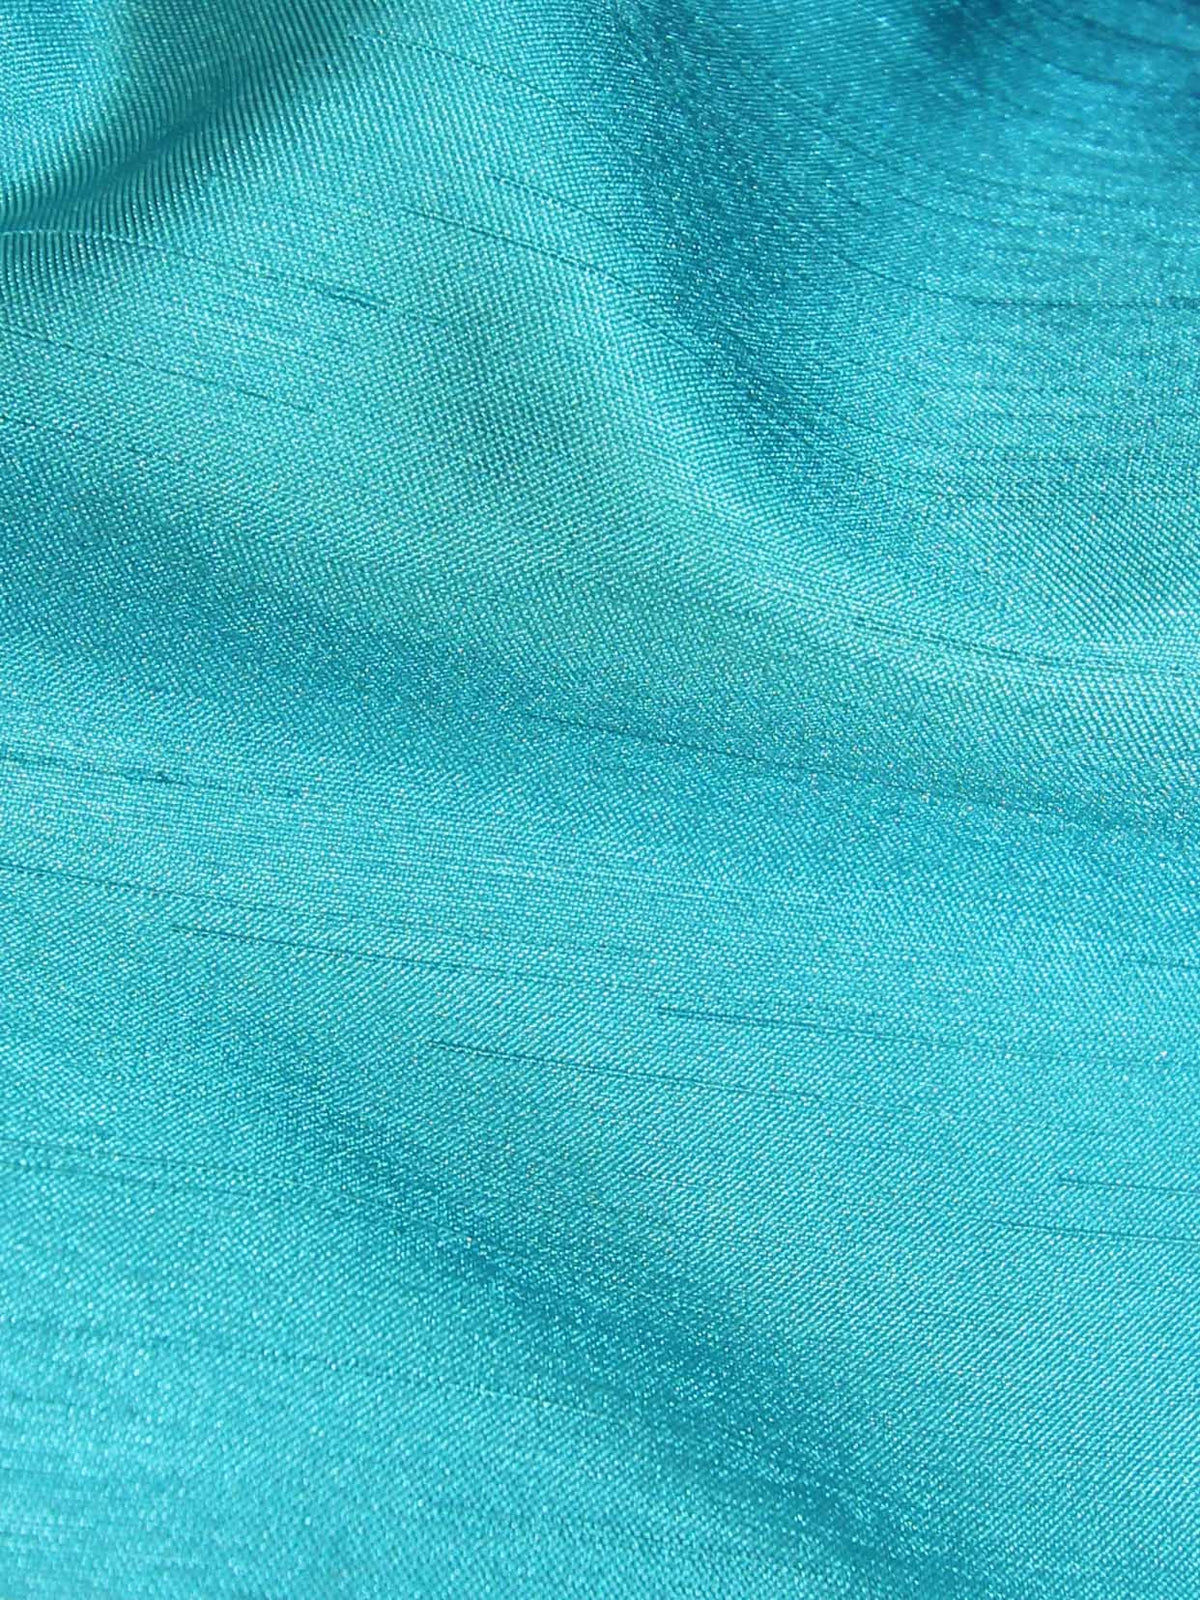 Turquoise Polyester Satin Backed Dupion - Clarity